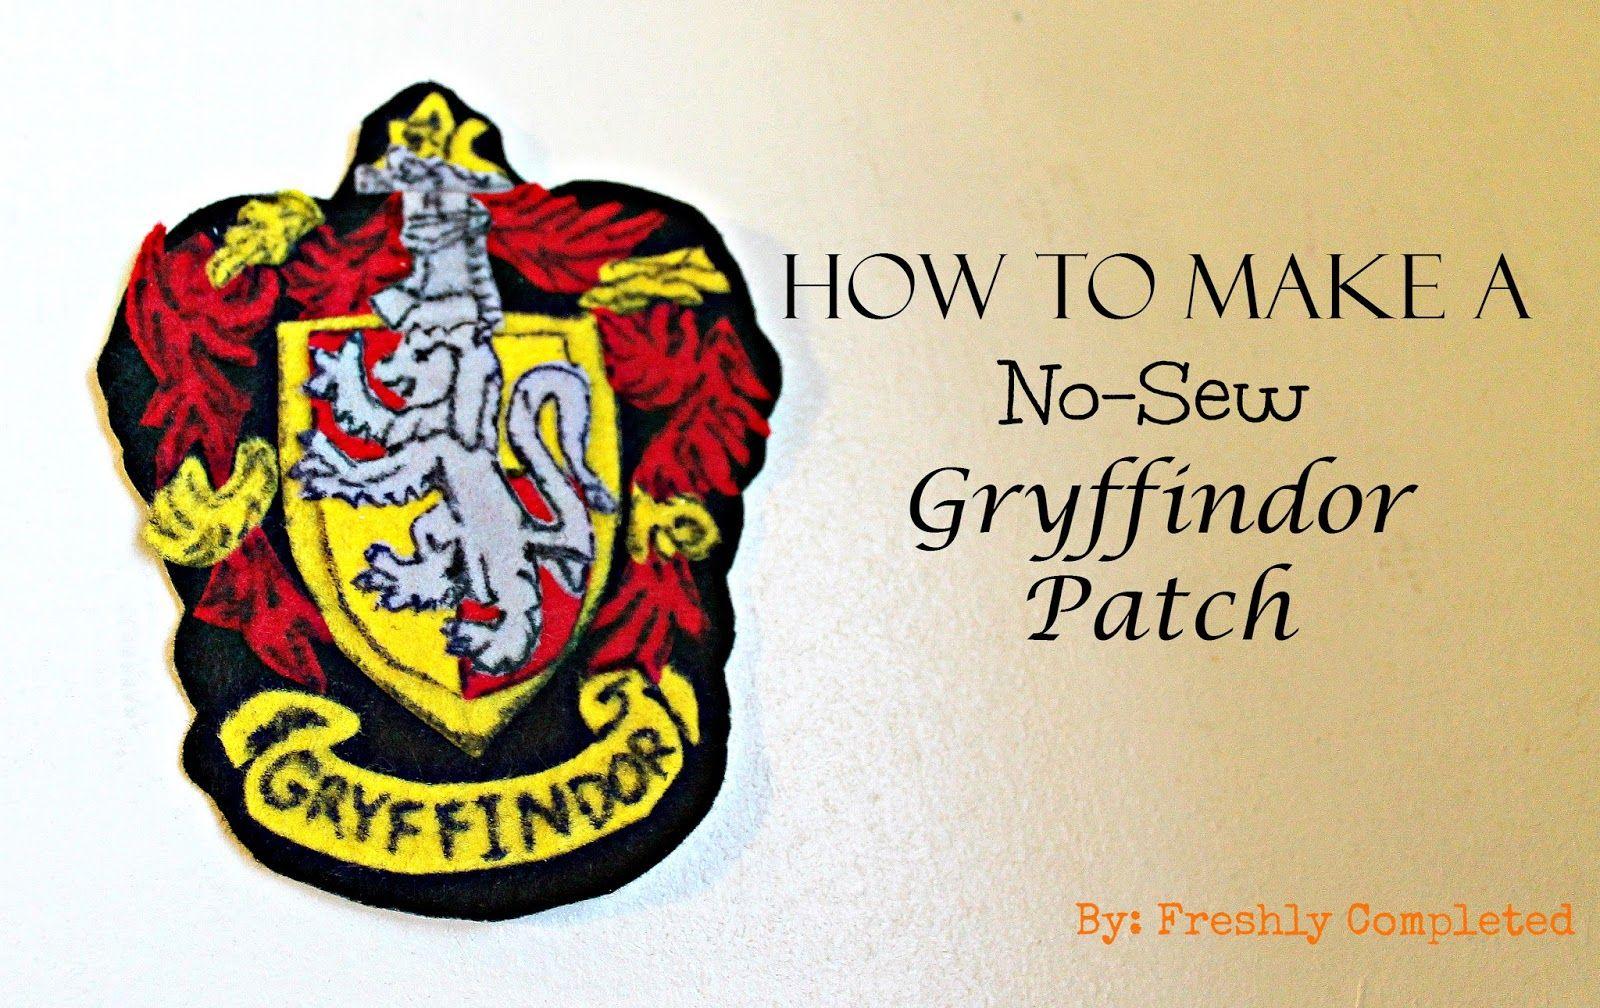 Simple Gryffindor Logo - Freshly Completed: How to Make a No-Sew Gryffindor Patch